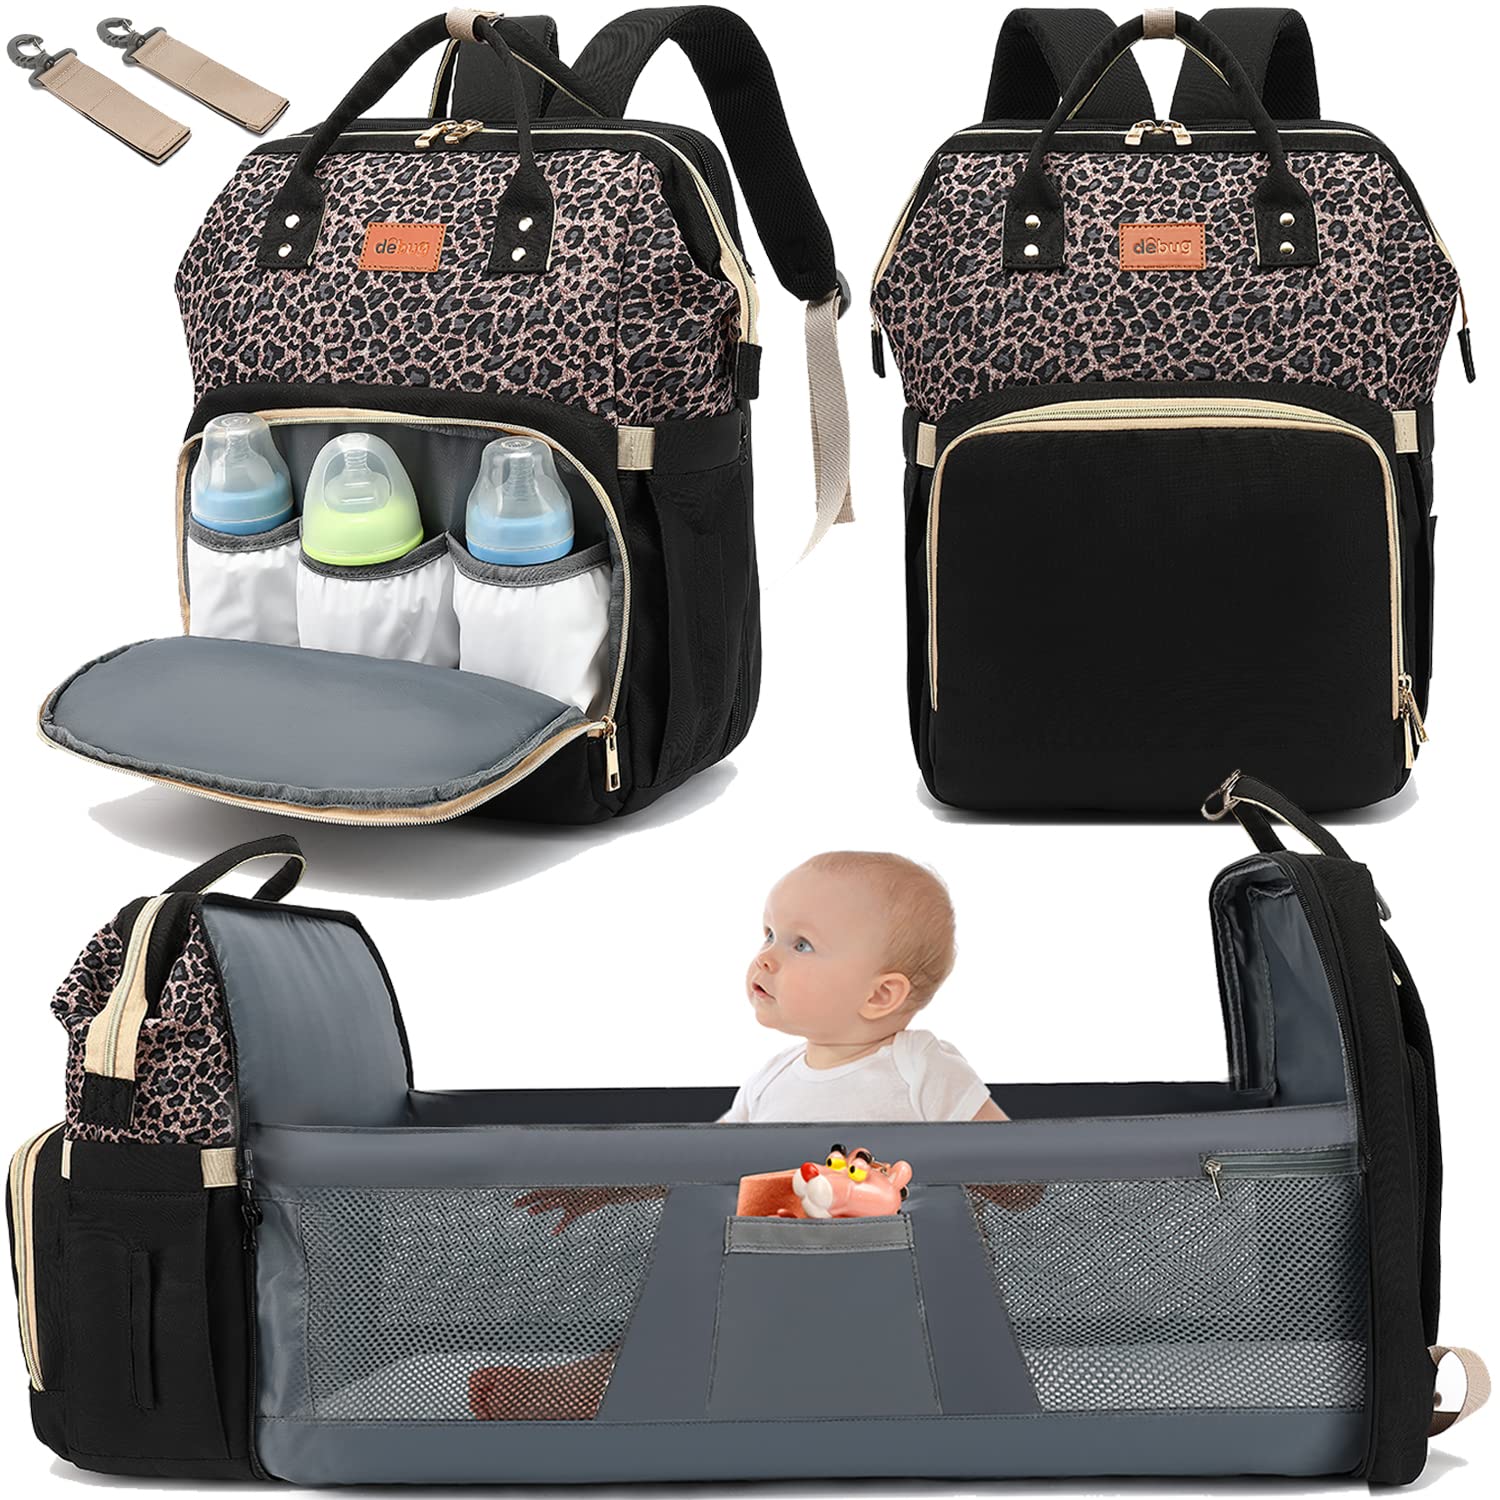 DEBUG Baby Diaper Bag Backpack Takes 32% off at $40 Now